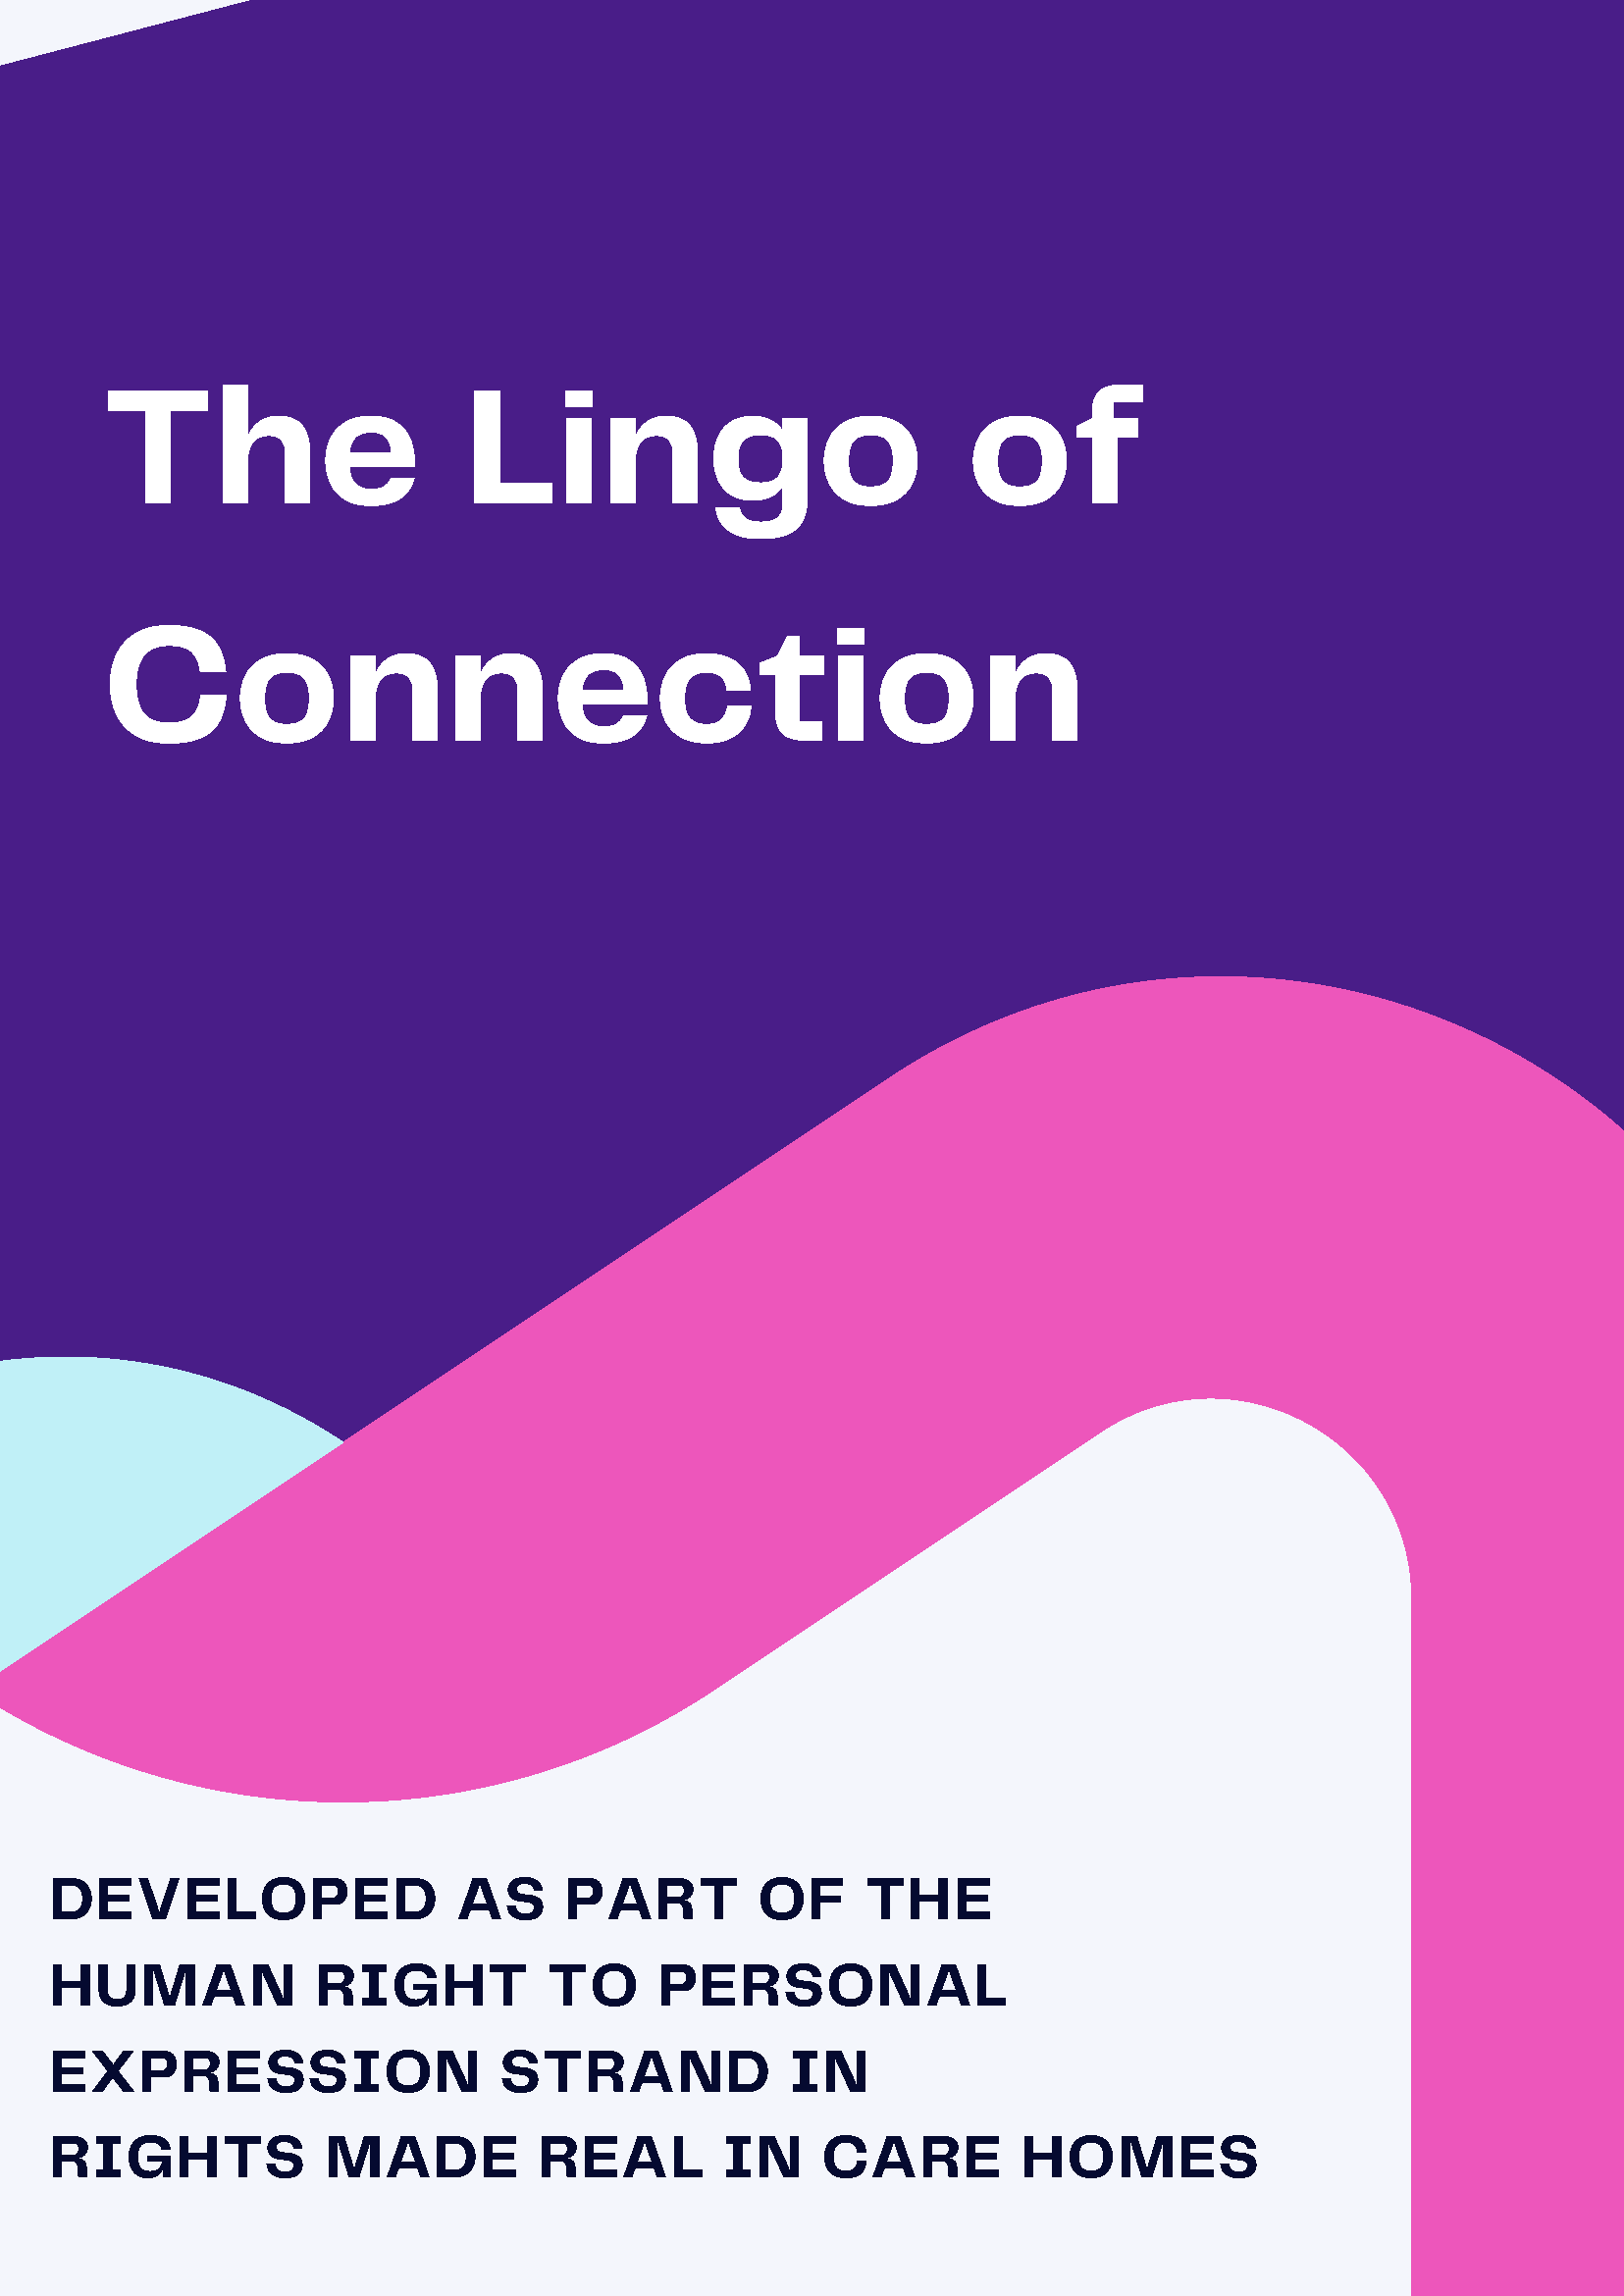 Lingo of Connection Resource